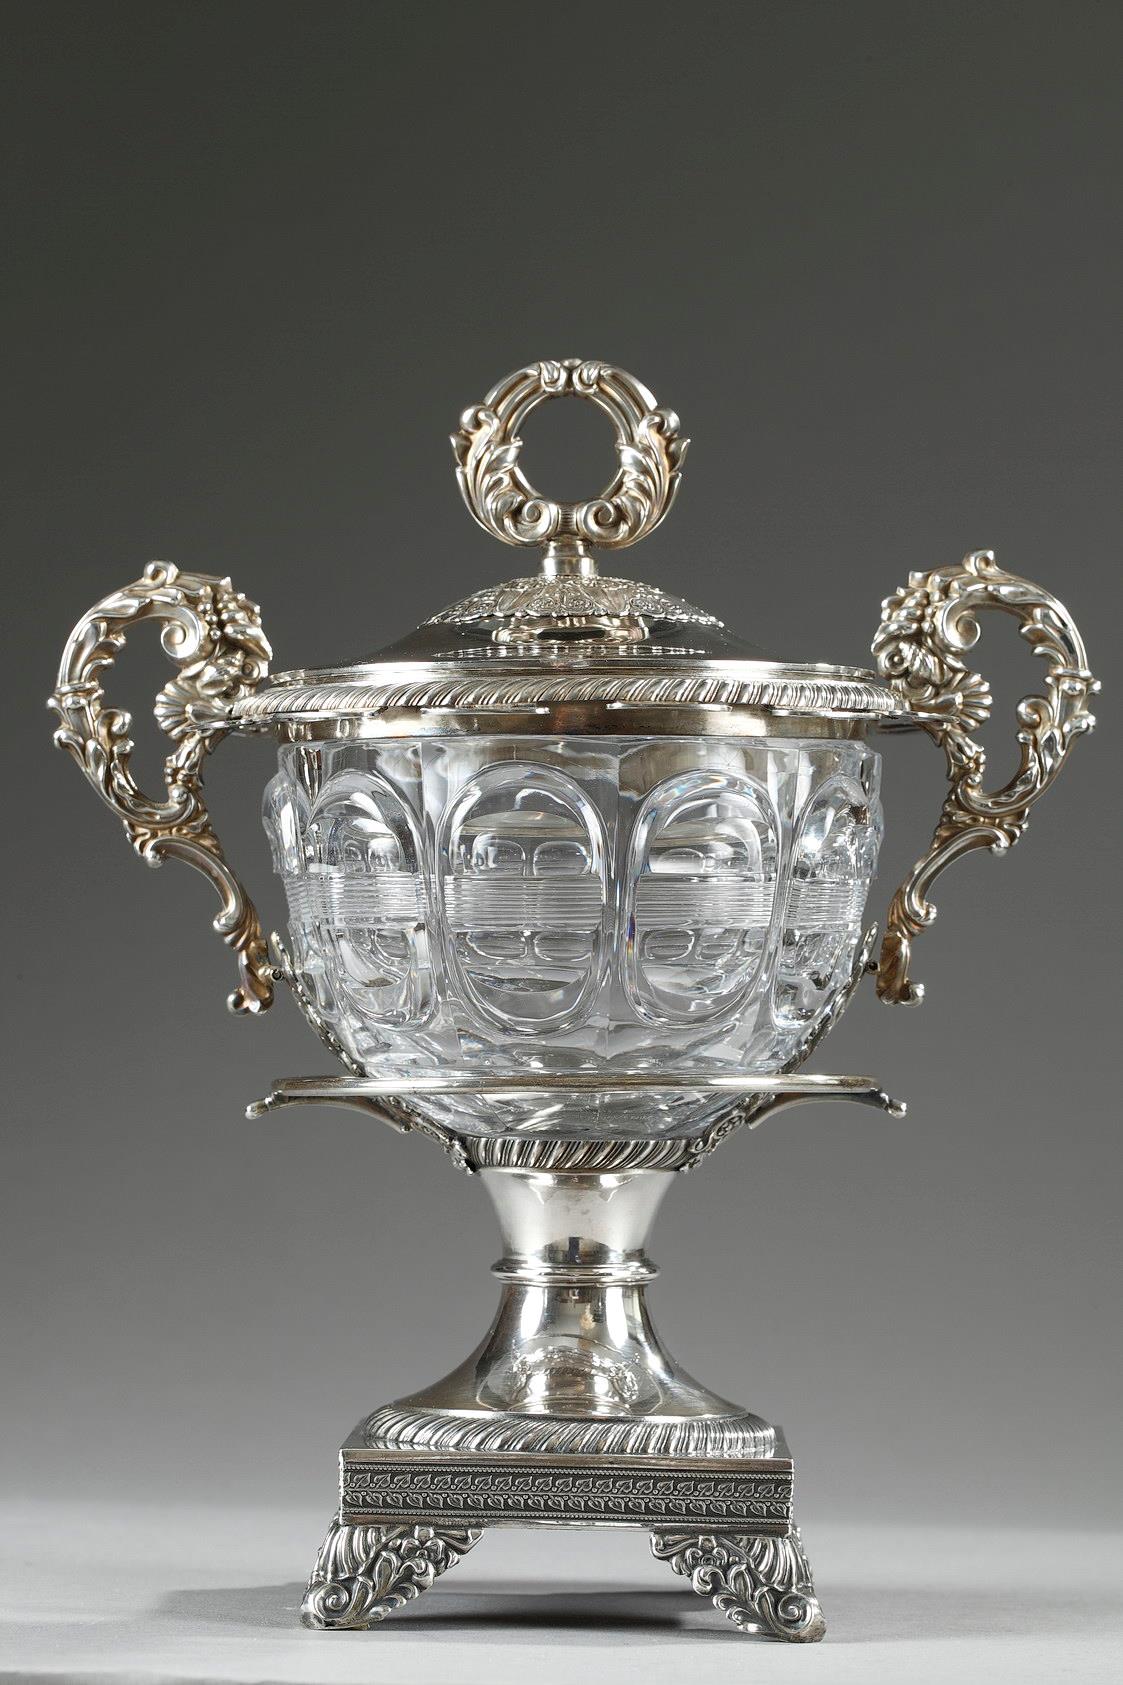 19th century LARGE SILVER AND CUT-CRYSTAL CONFITURIER,with 12 spoons. 

Restauration Period.